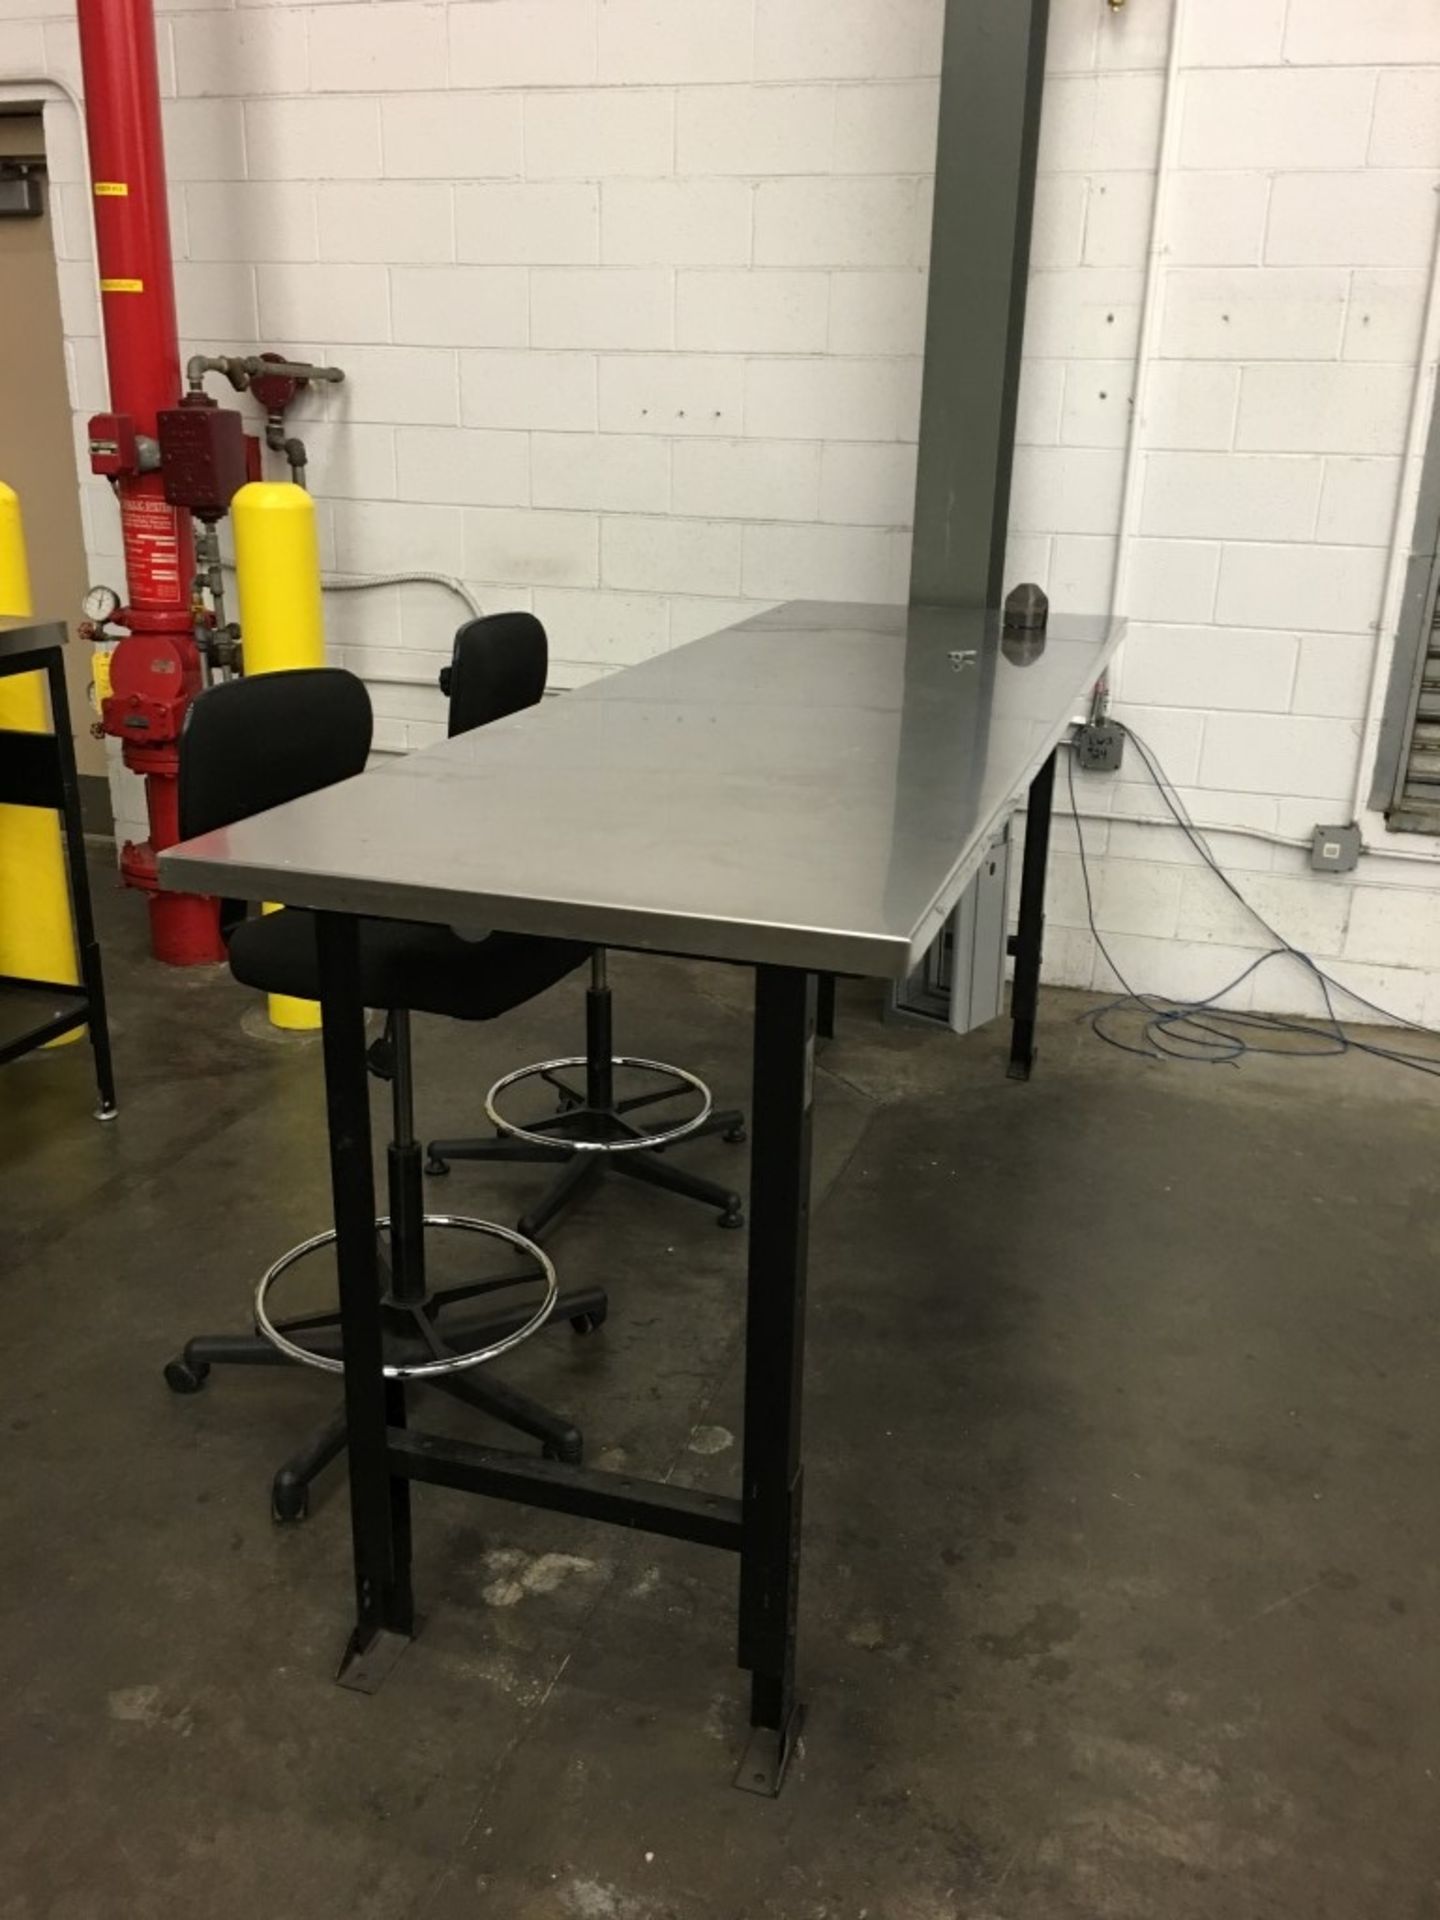 STAINLESS STEEL WORK TABLE WITH CHAIR - Image 2 of 3